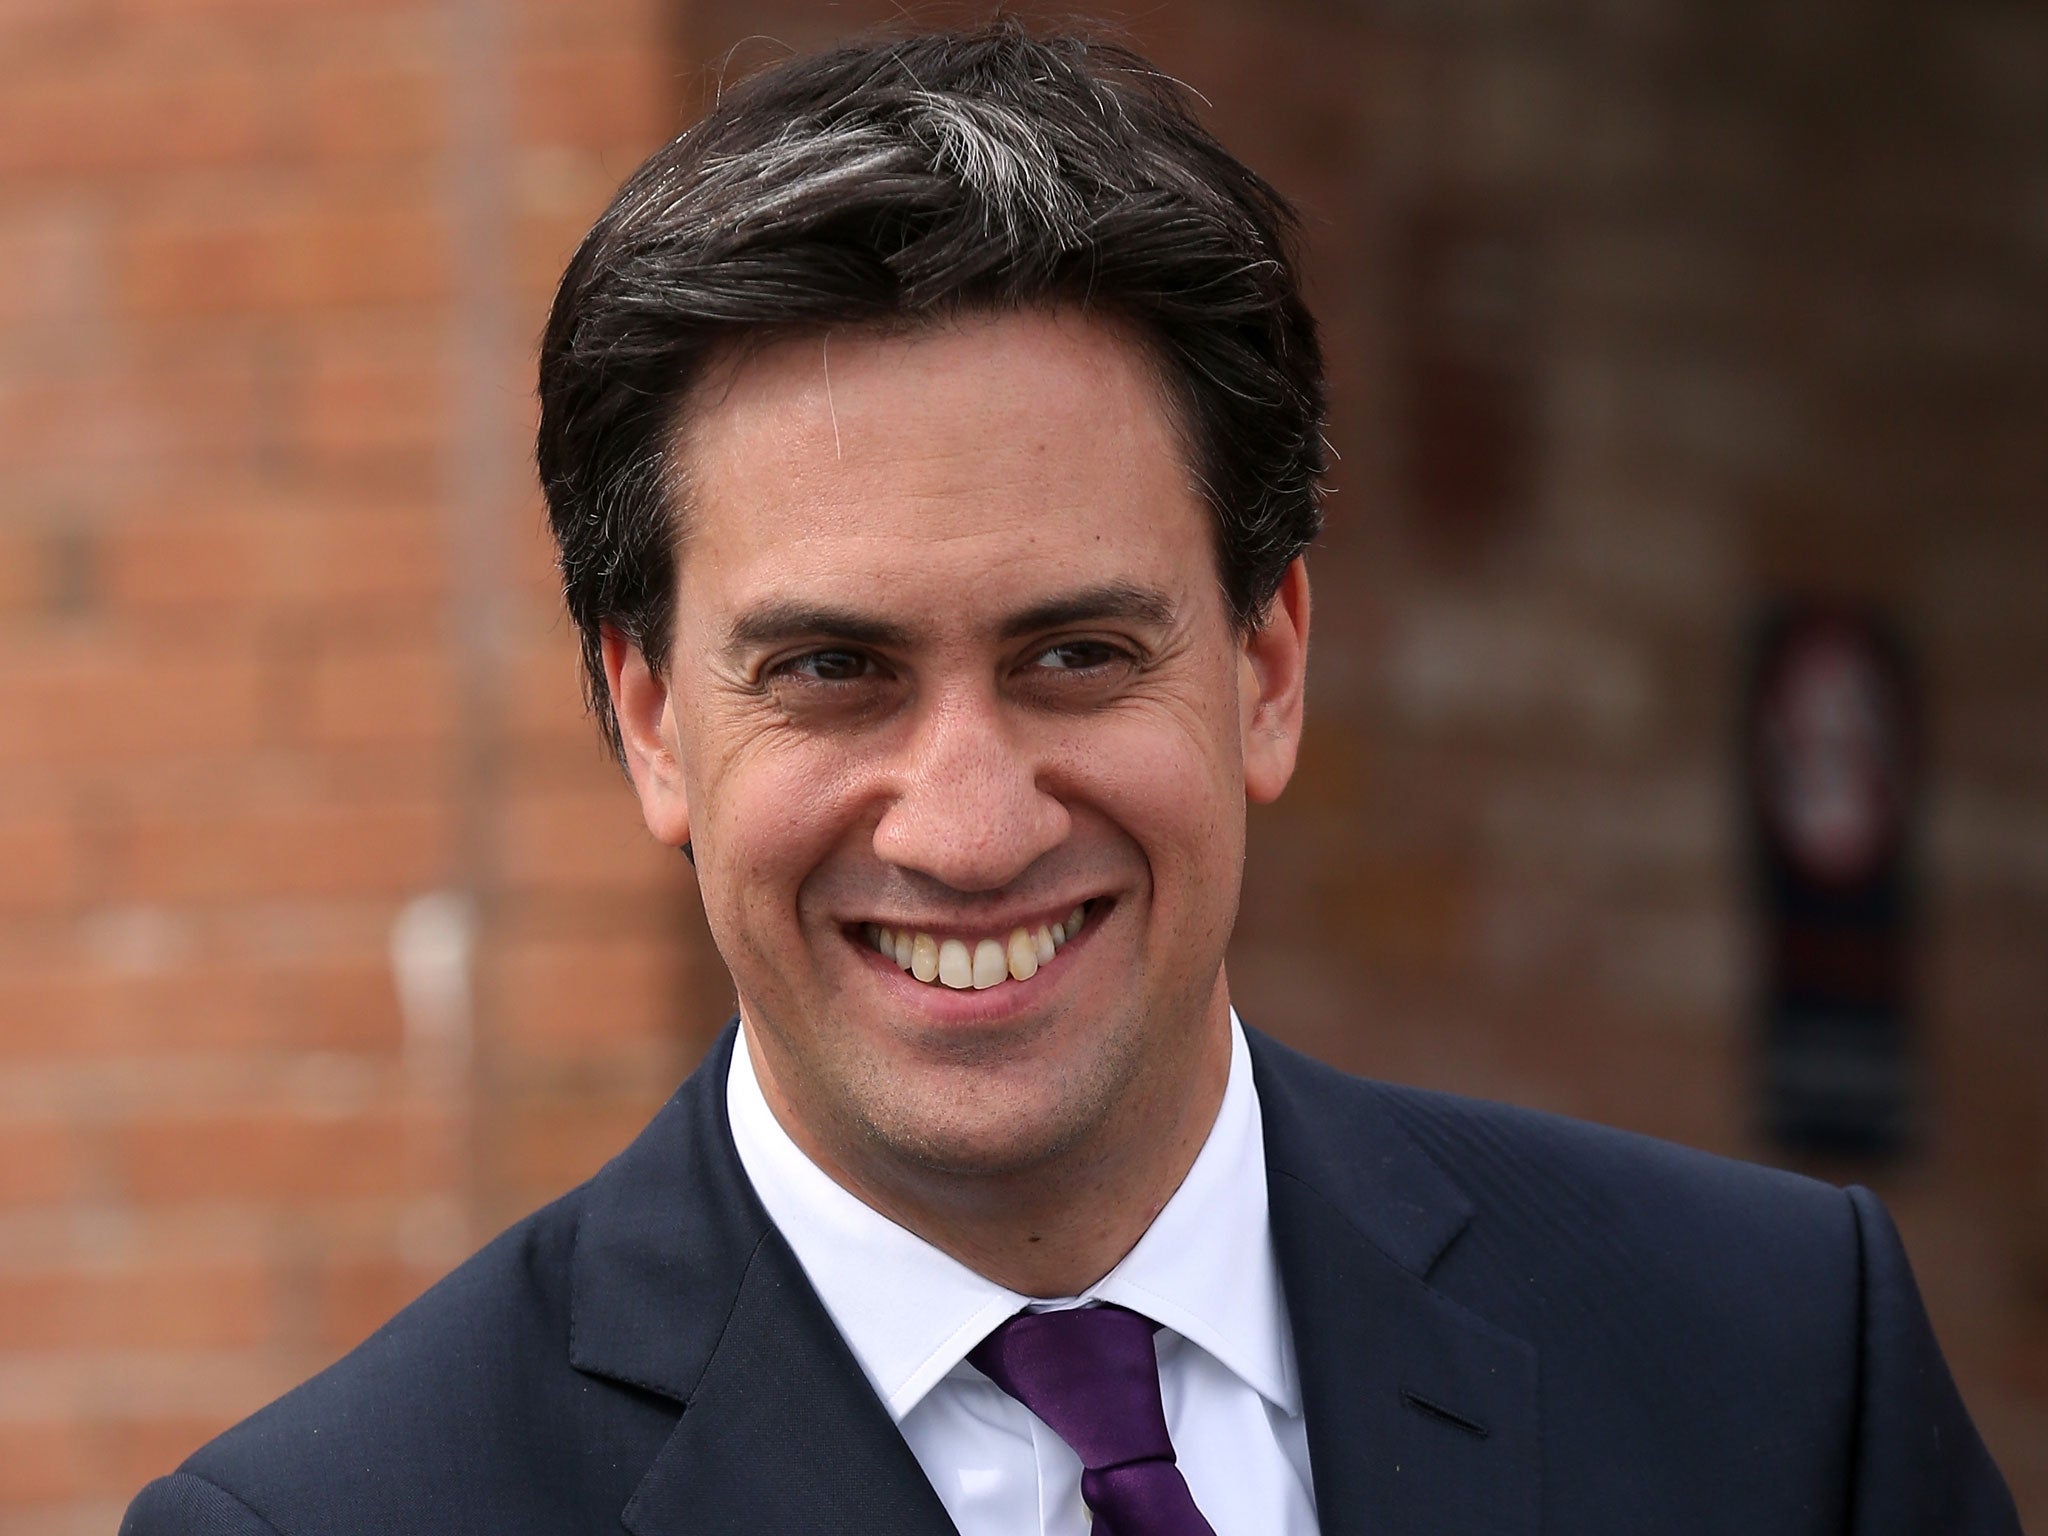 Ed Miliband said the Labour Party had become ‘the champion of competition’